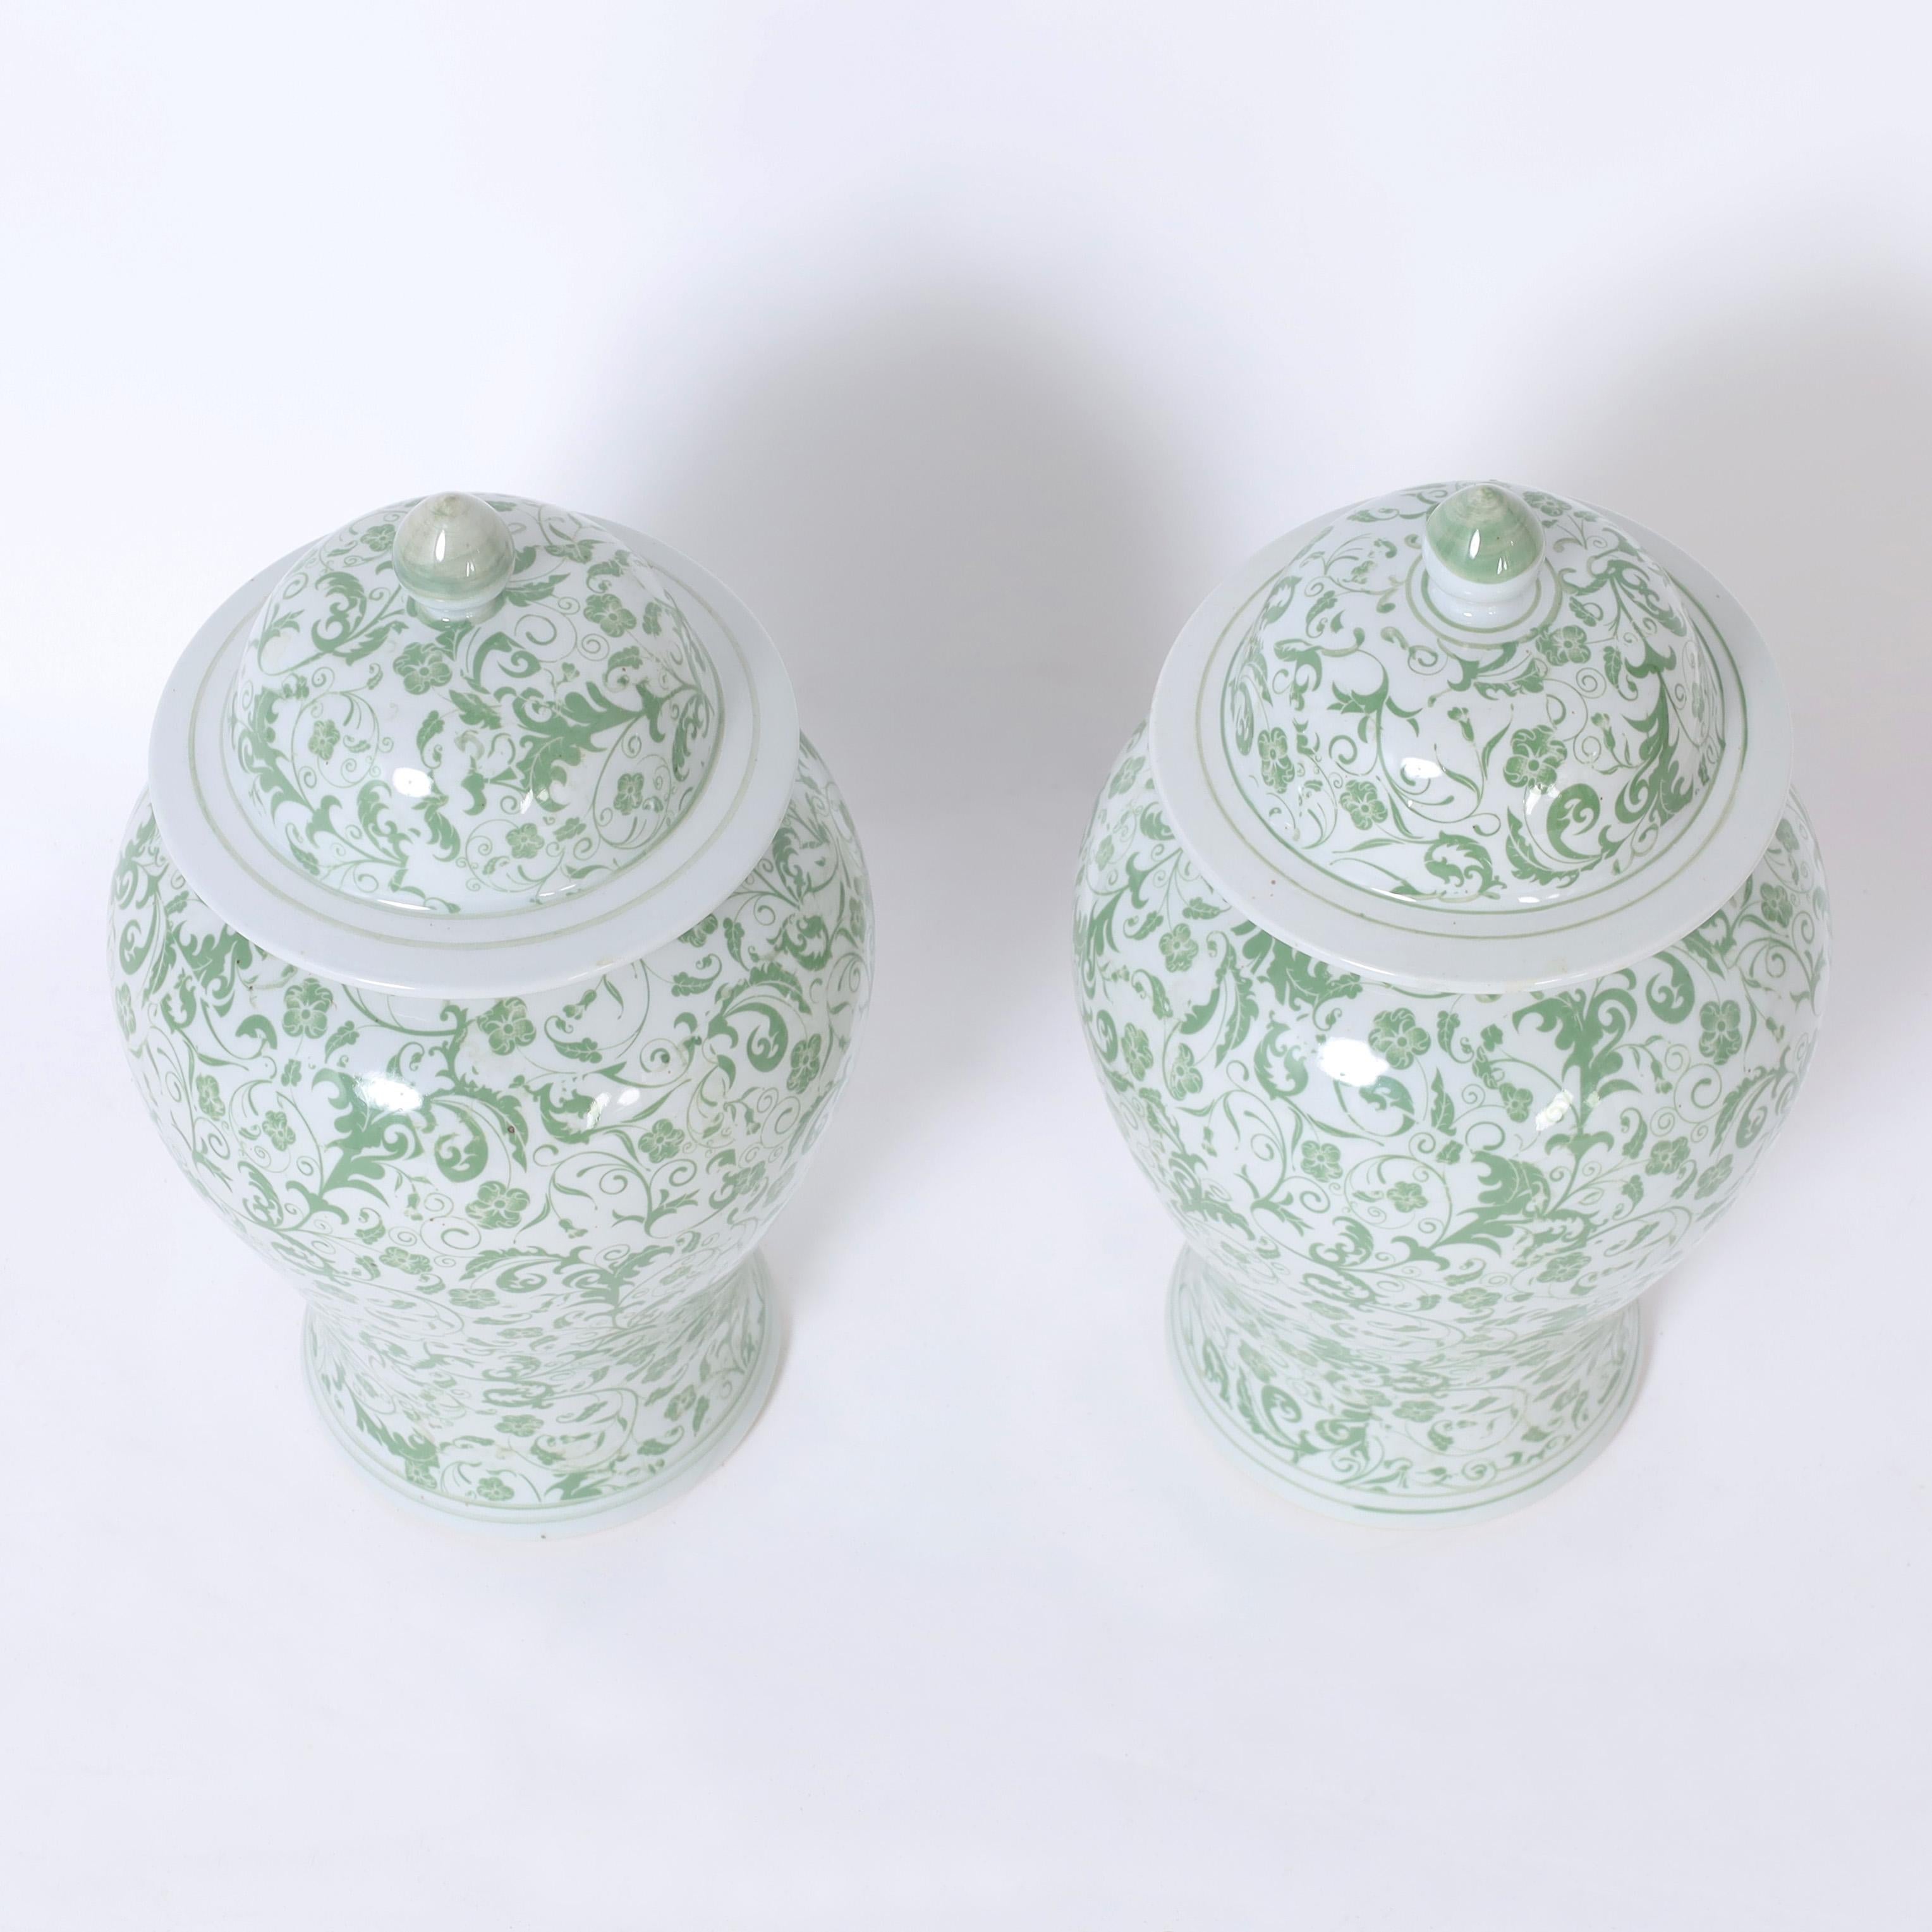 Lofty pair of Chinese porcelain ginger jars hand crafted in classic form and hand decorated in delightful green and white floral designs.